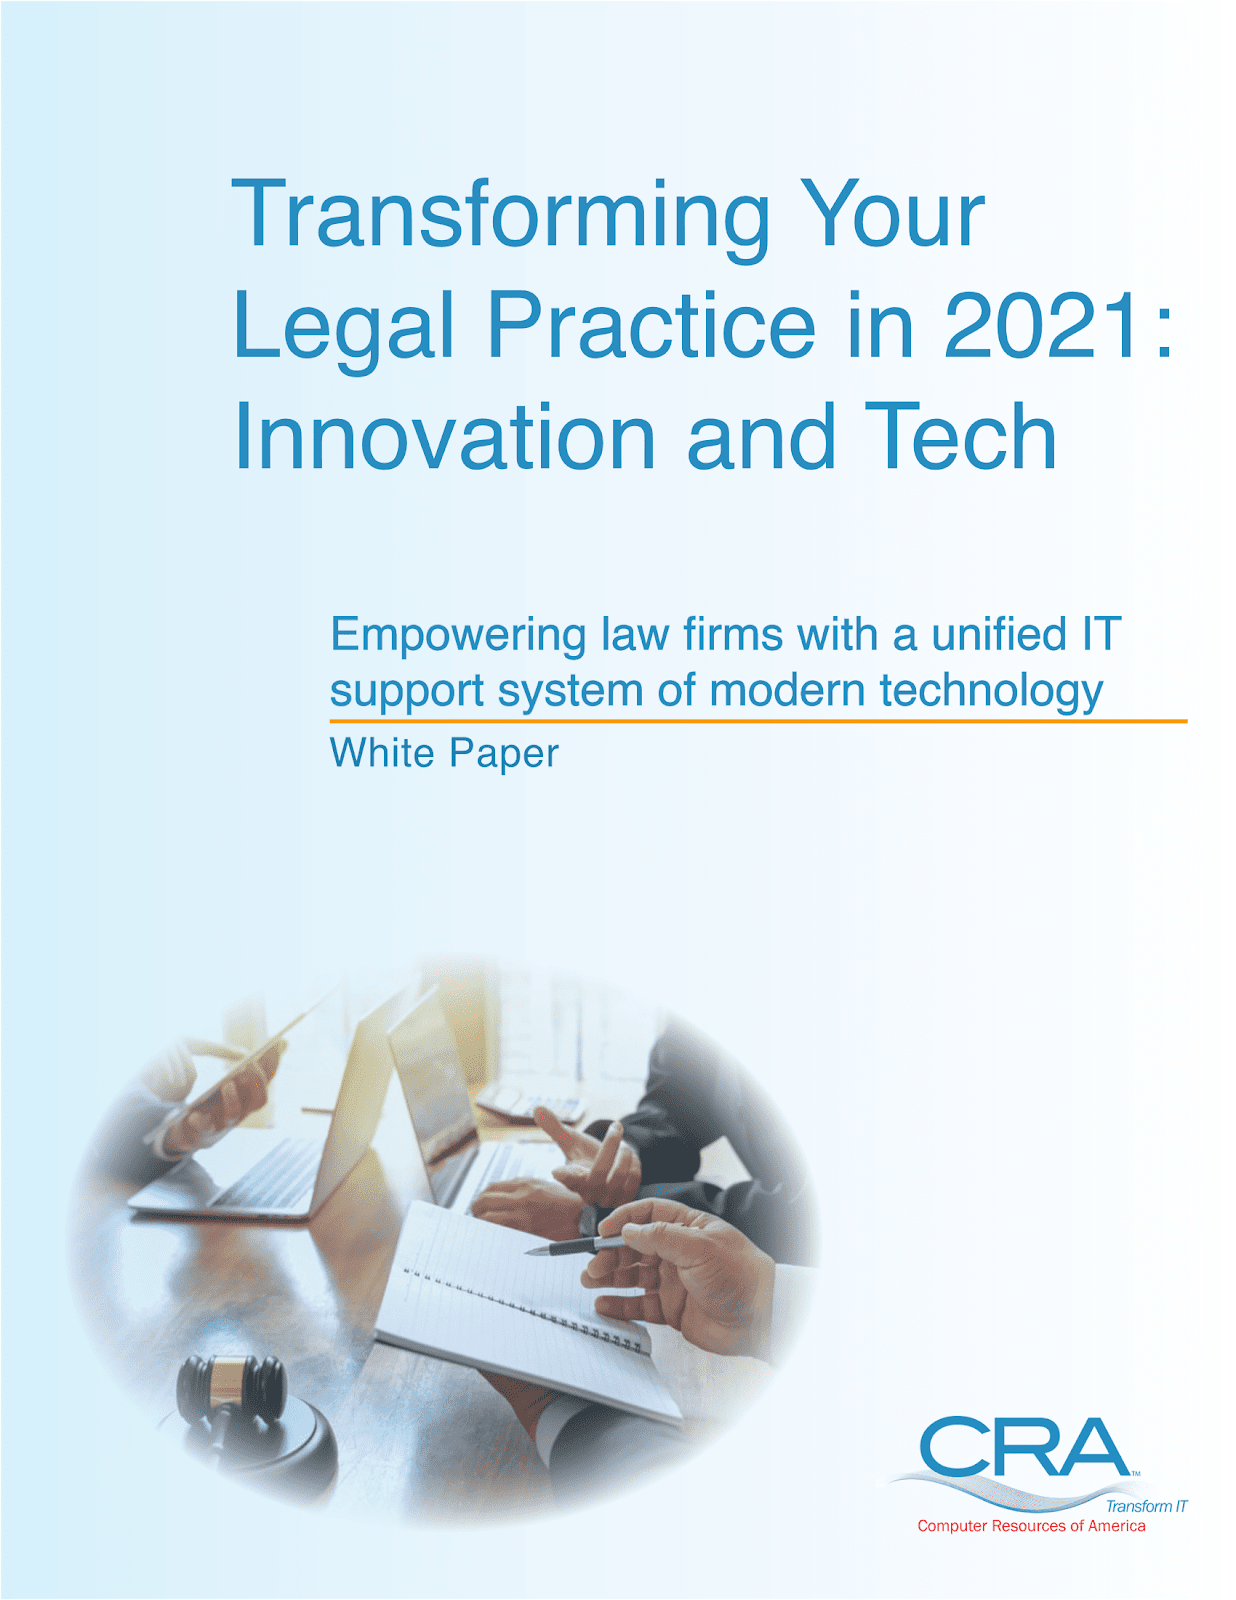 Transforming your legal practice 2021